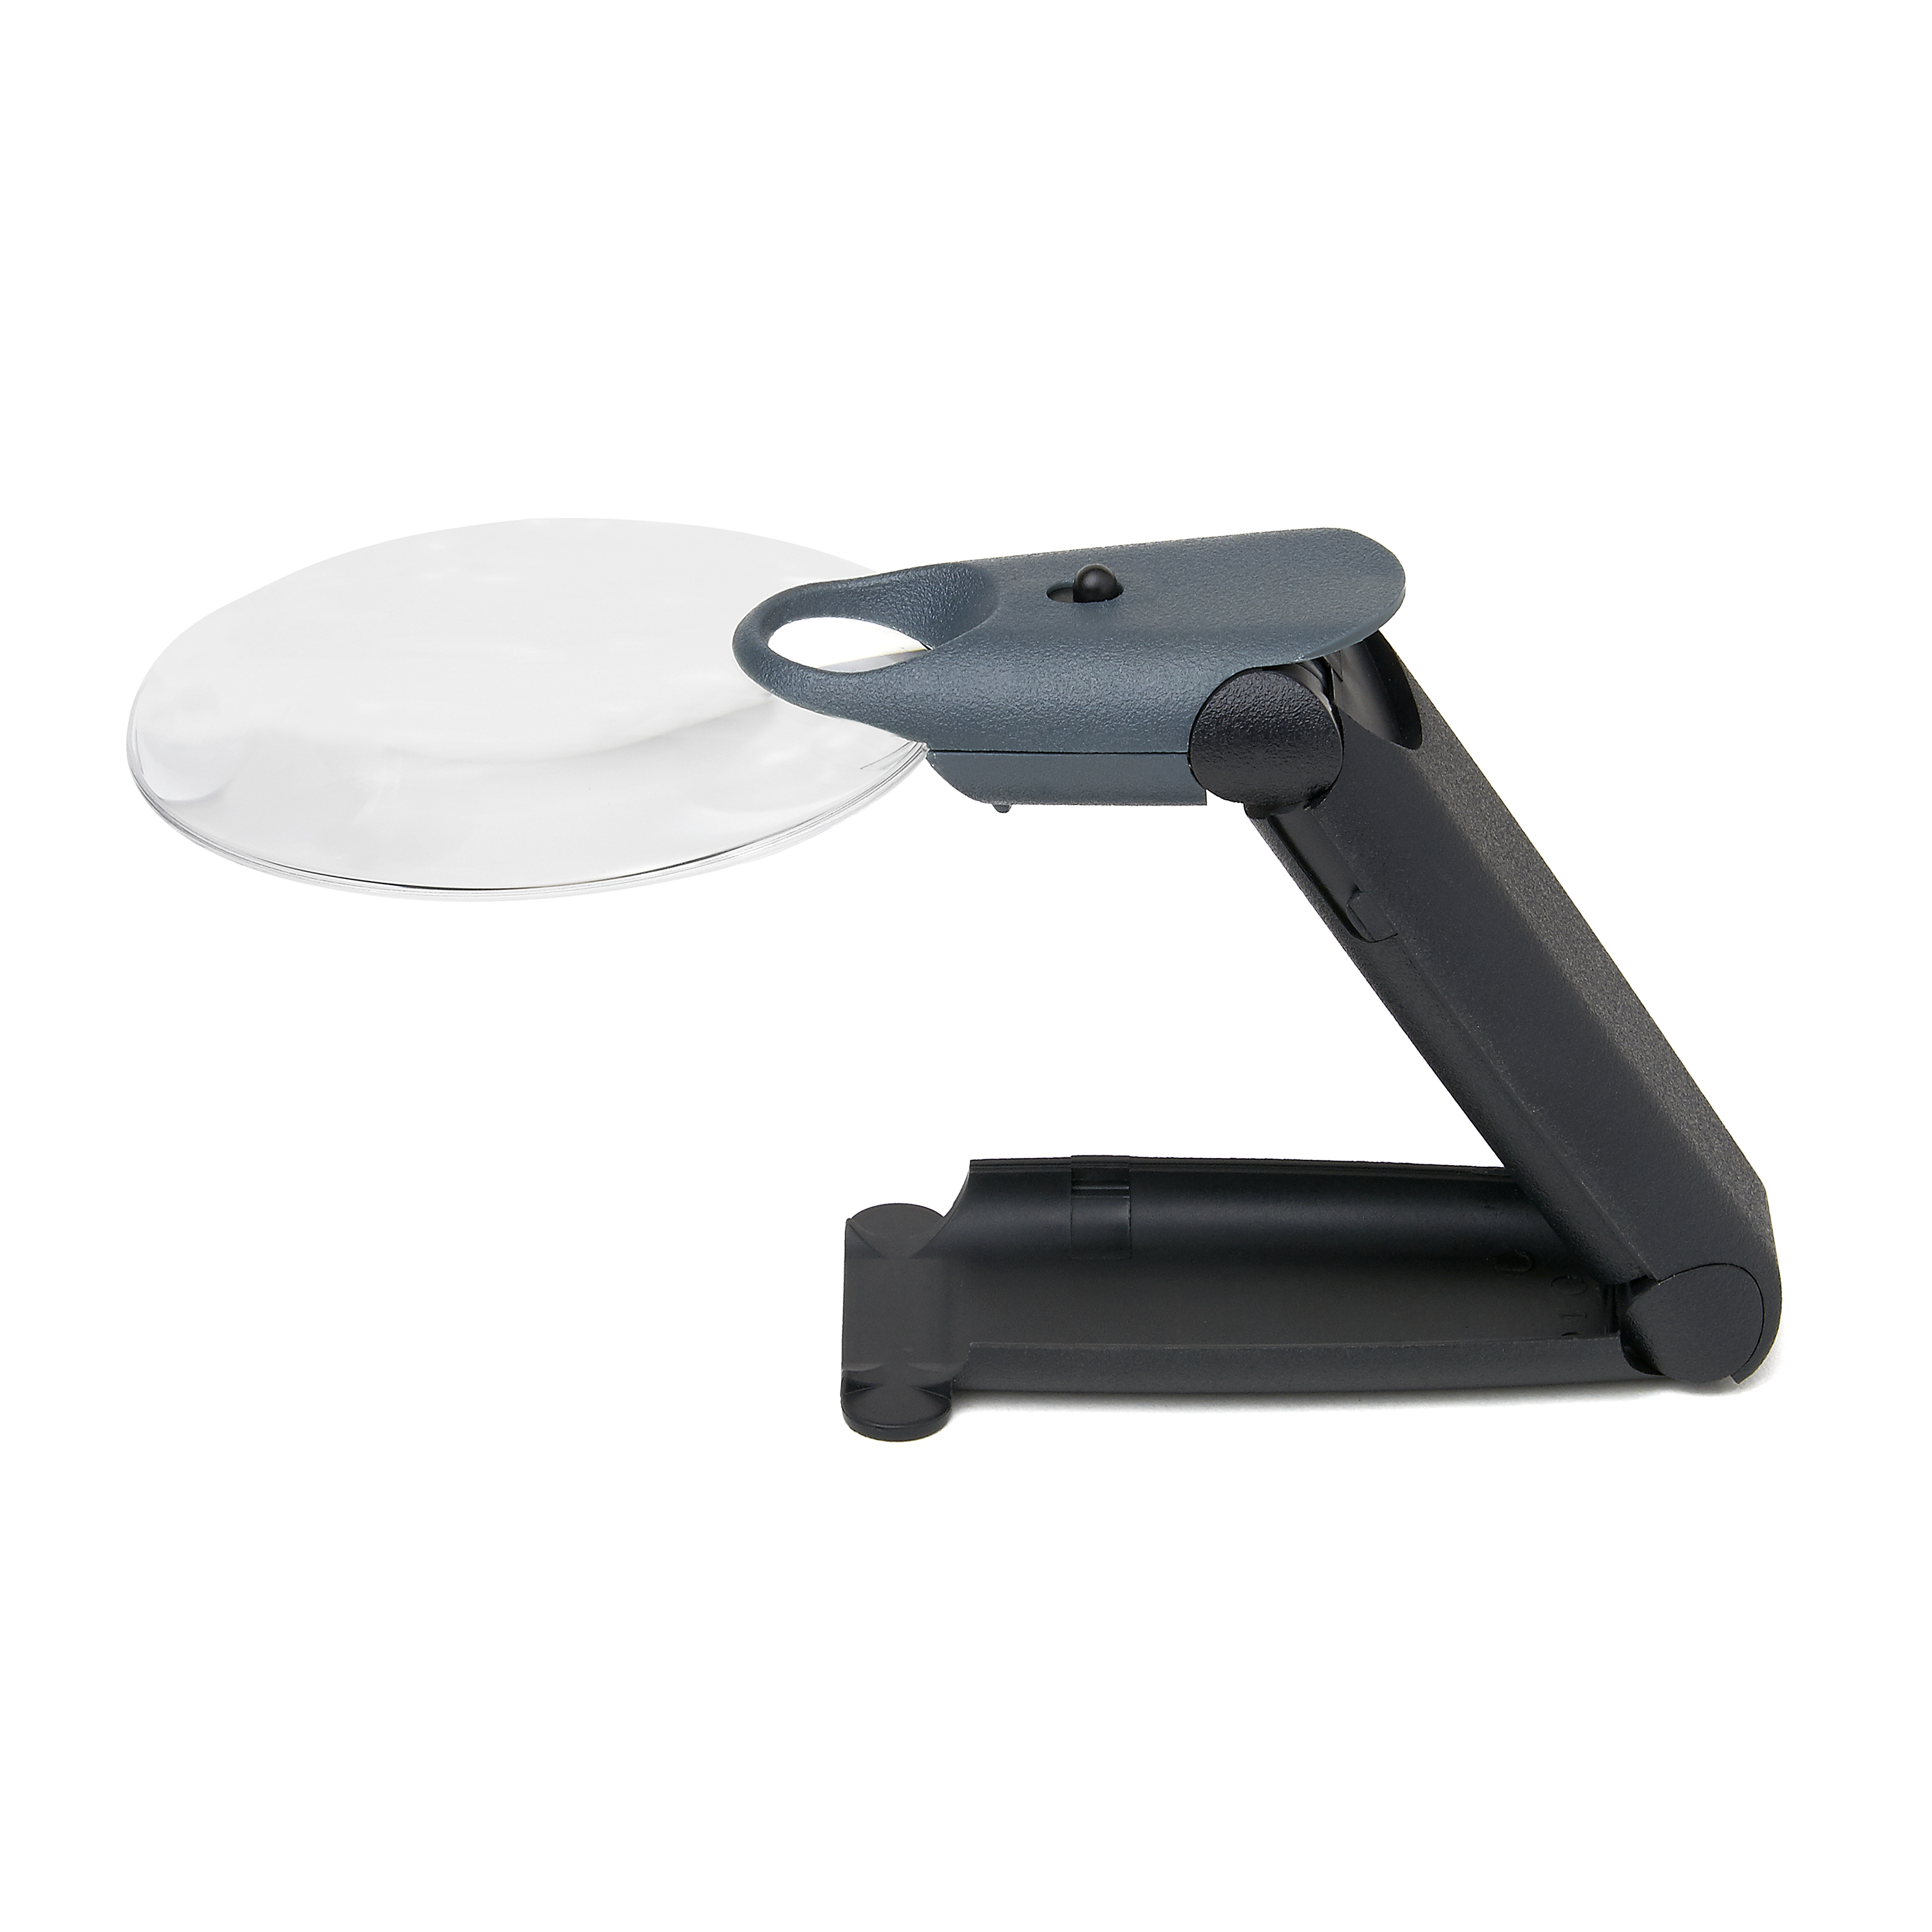 Carson 2.5x FreeHand 3.5" Acrylic Lens Rimless LED Lighted Magnifier with 5.5x Spot (FH-25) - image 3 of 6